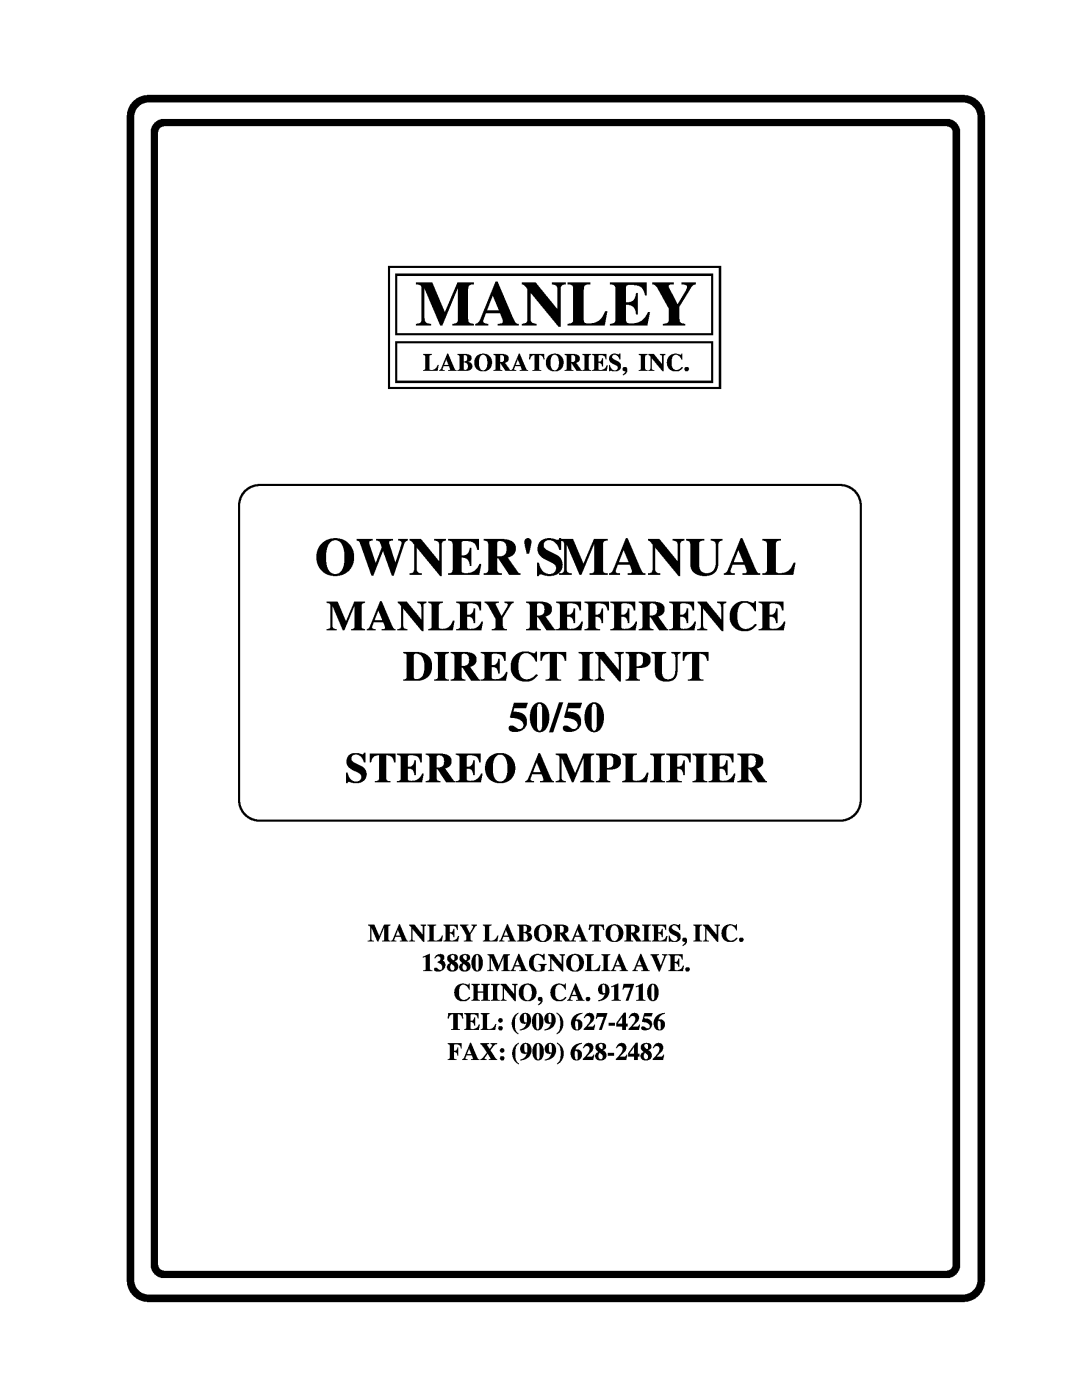 Manley Labs owner manual Manley, Ownersmanual, MANLEY REFERENCE DIRECT INPUT 50/50, Stereo Amplifier, Laboratories, Inc 